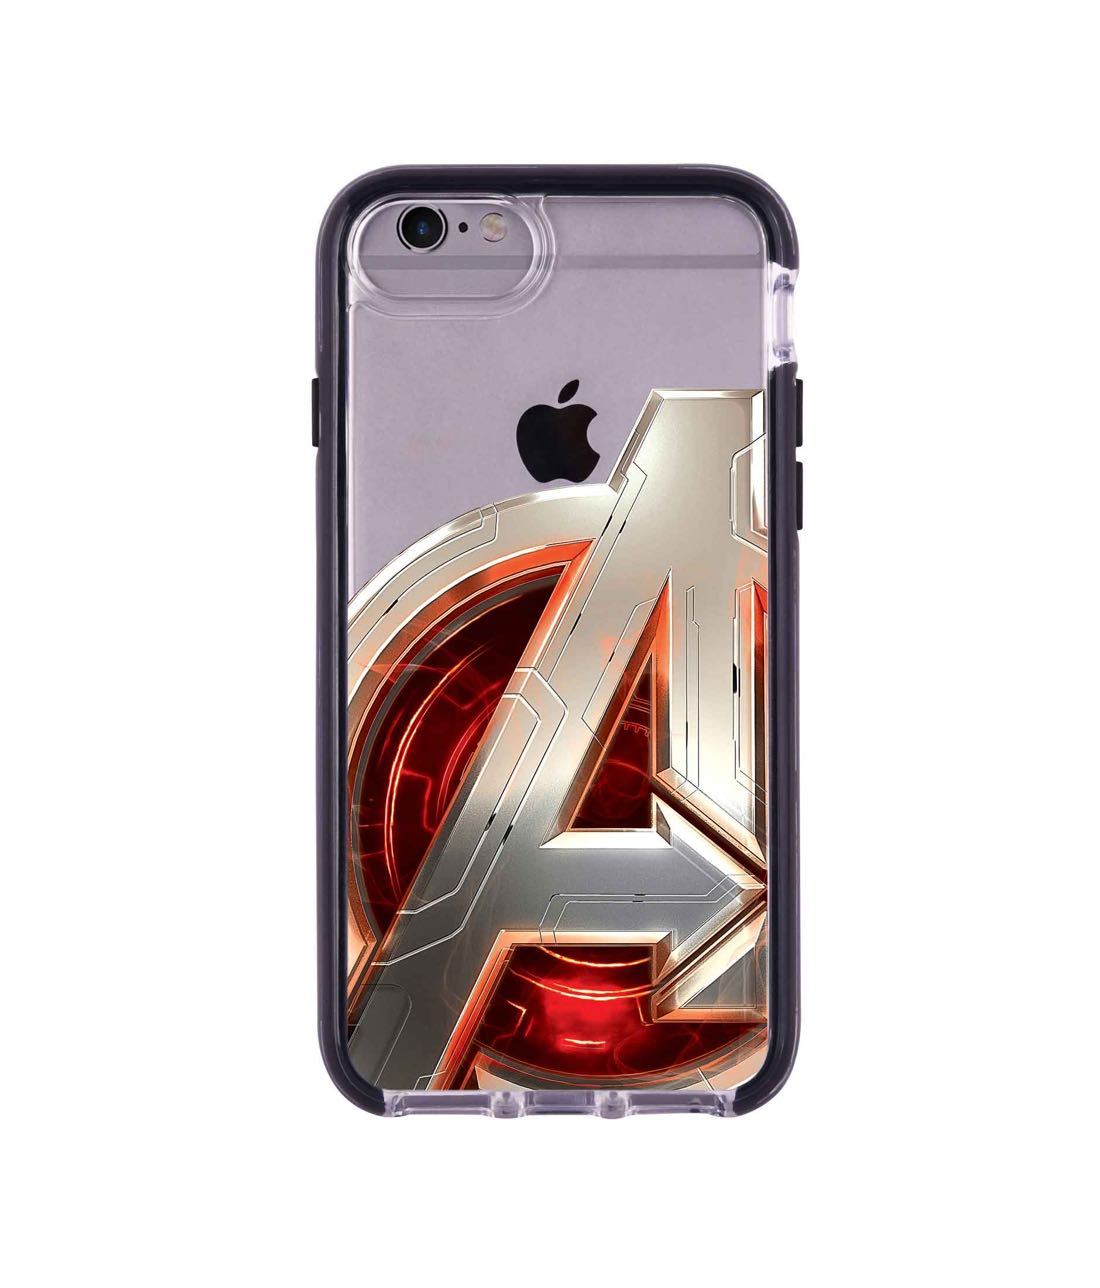 Avengers Version 2 - Extreme Phone Case for iPhone 6S Plus